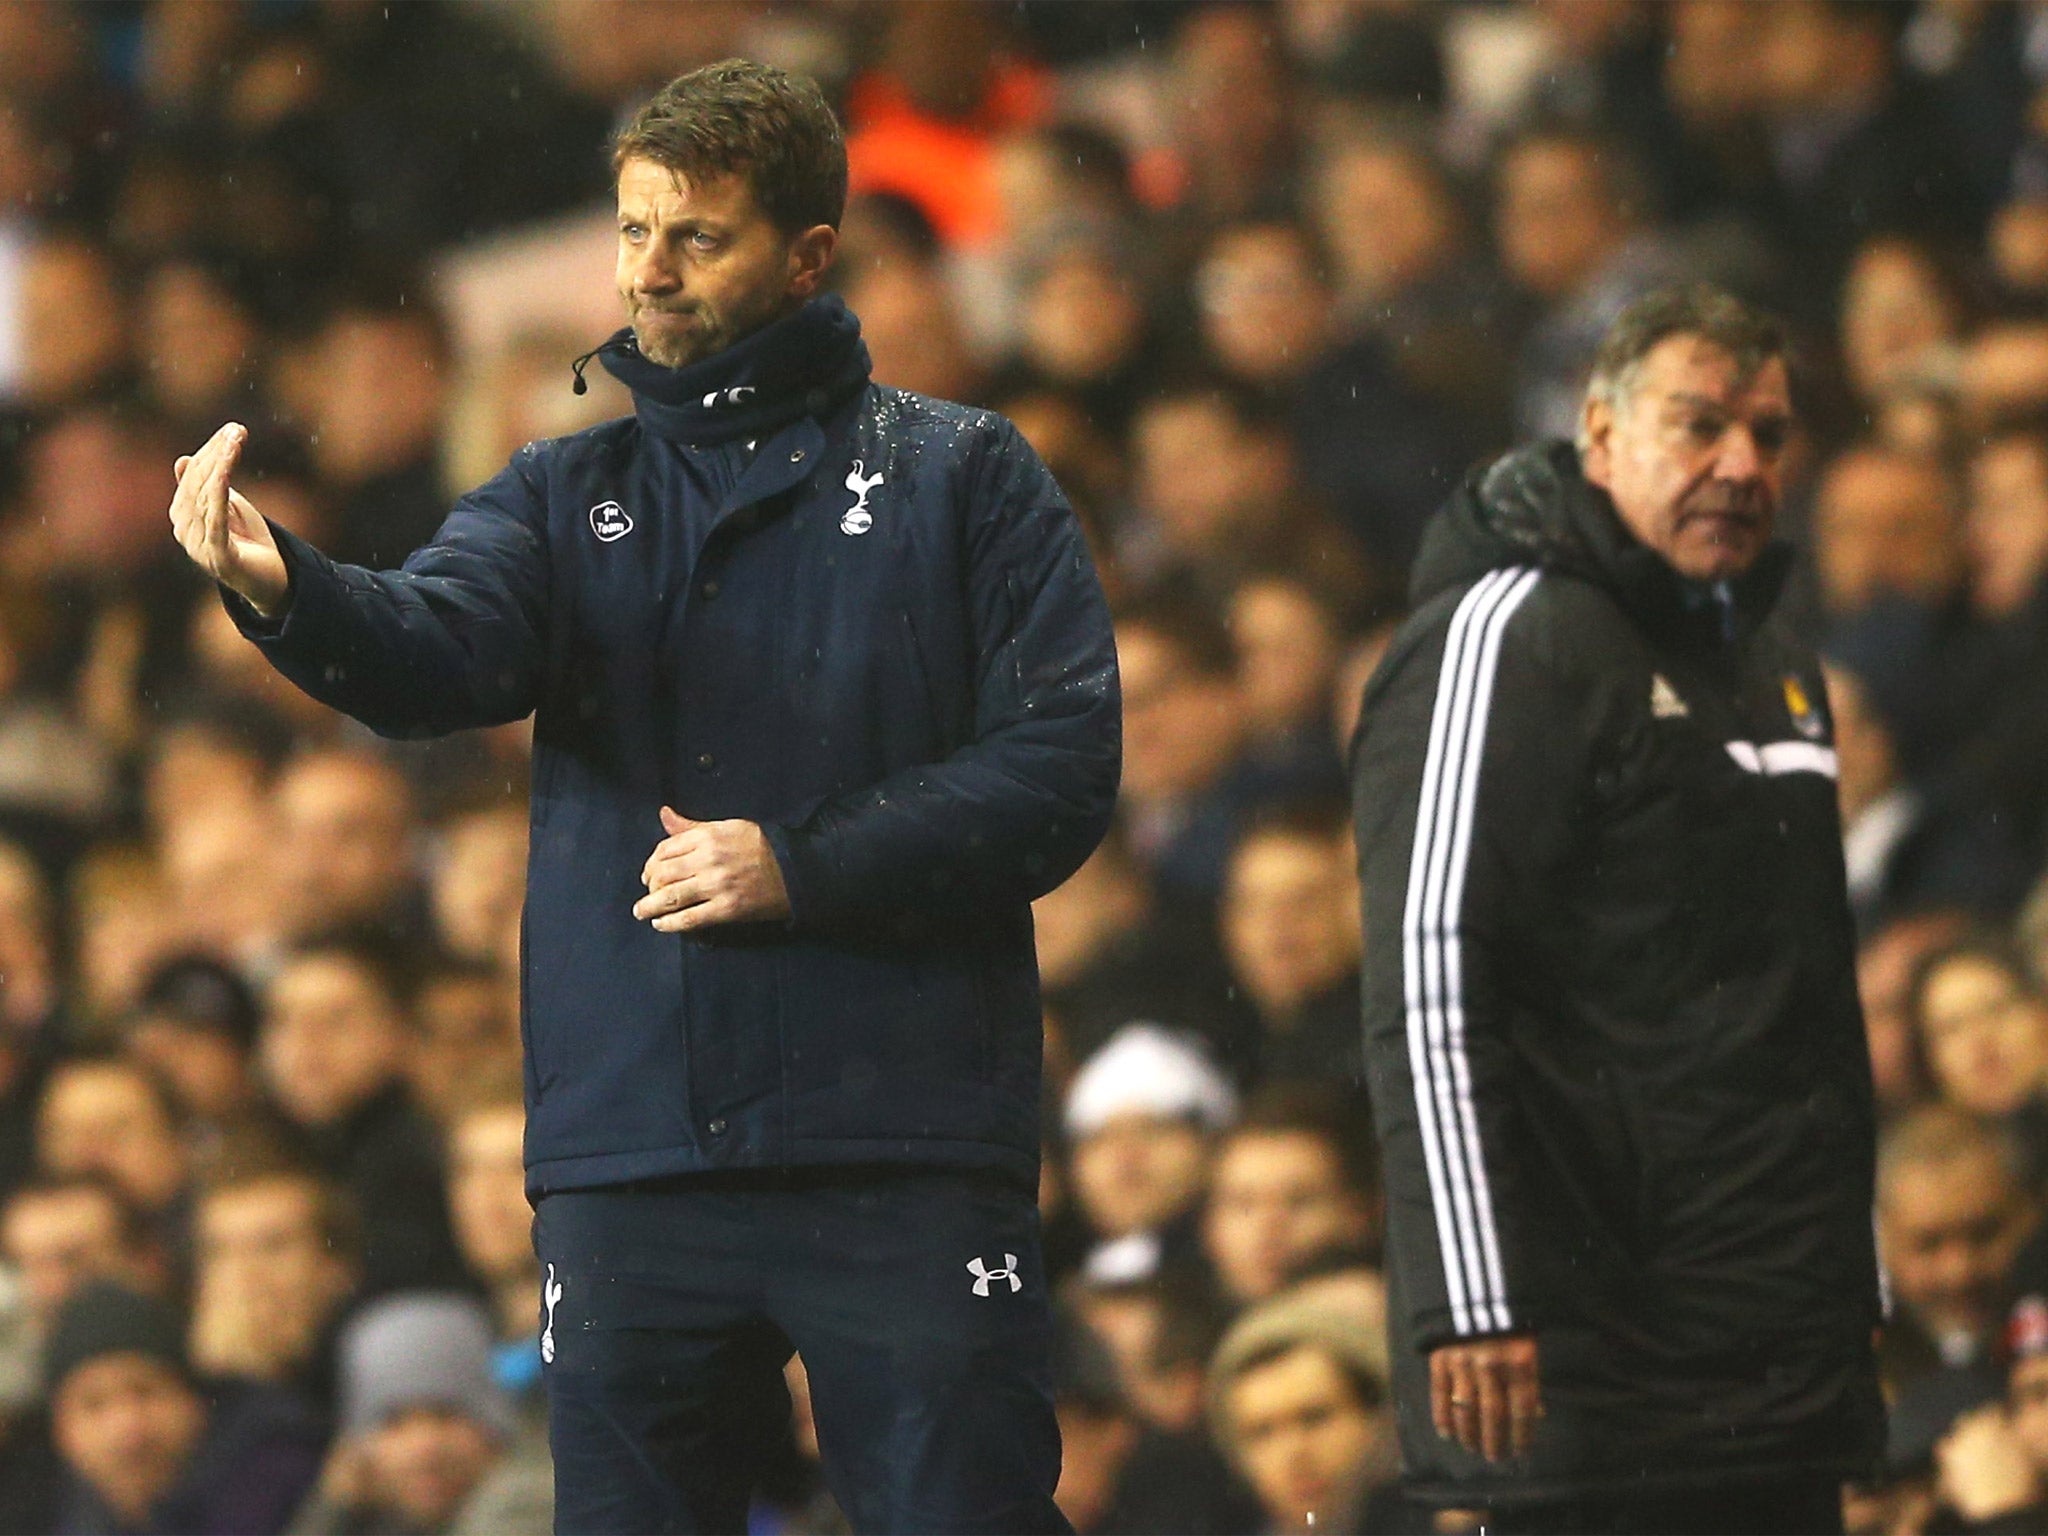 Tottenham’s new man in charge Tim Sherwood follows the action alongside the West Ham manager, Sam Allardyce